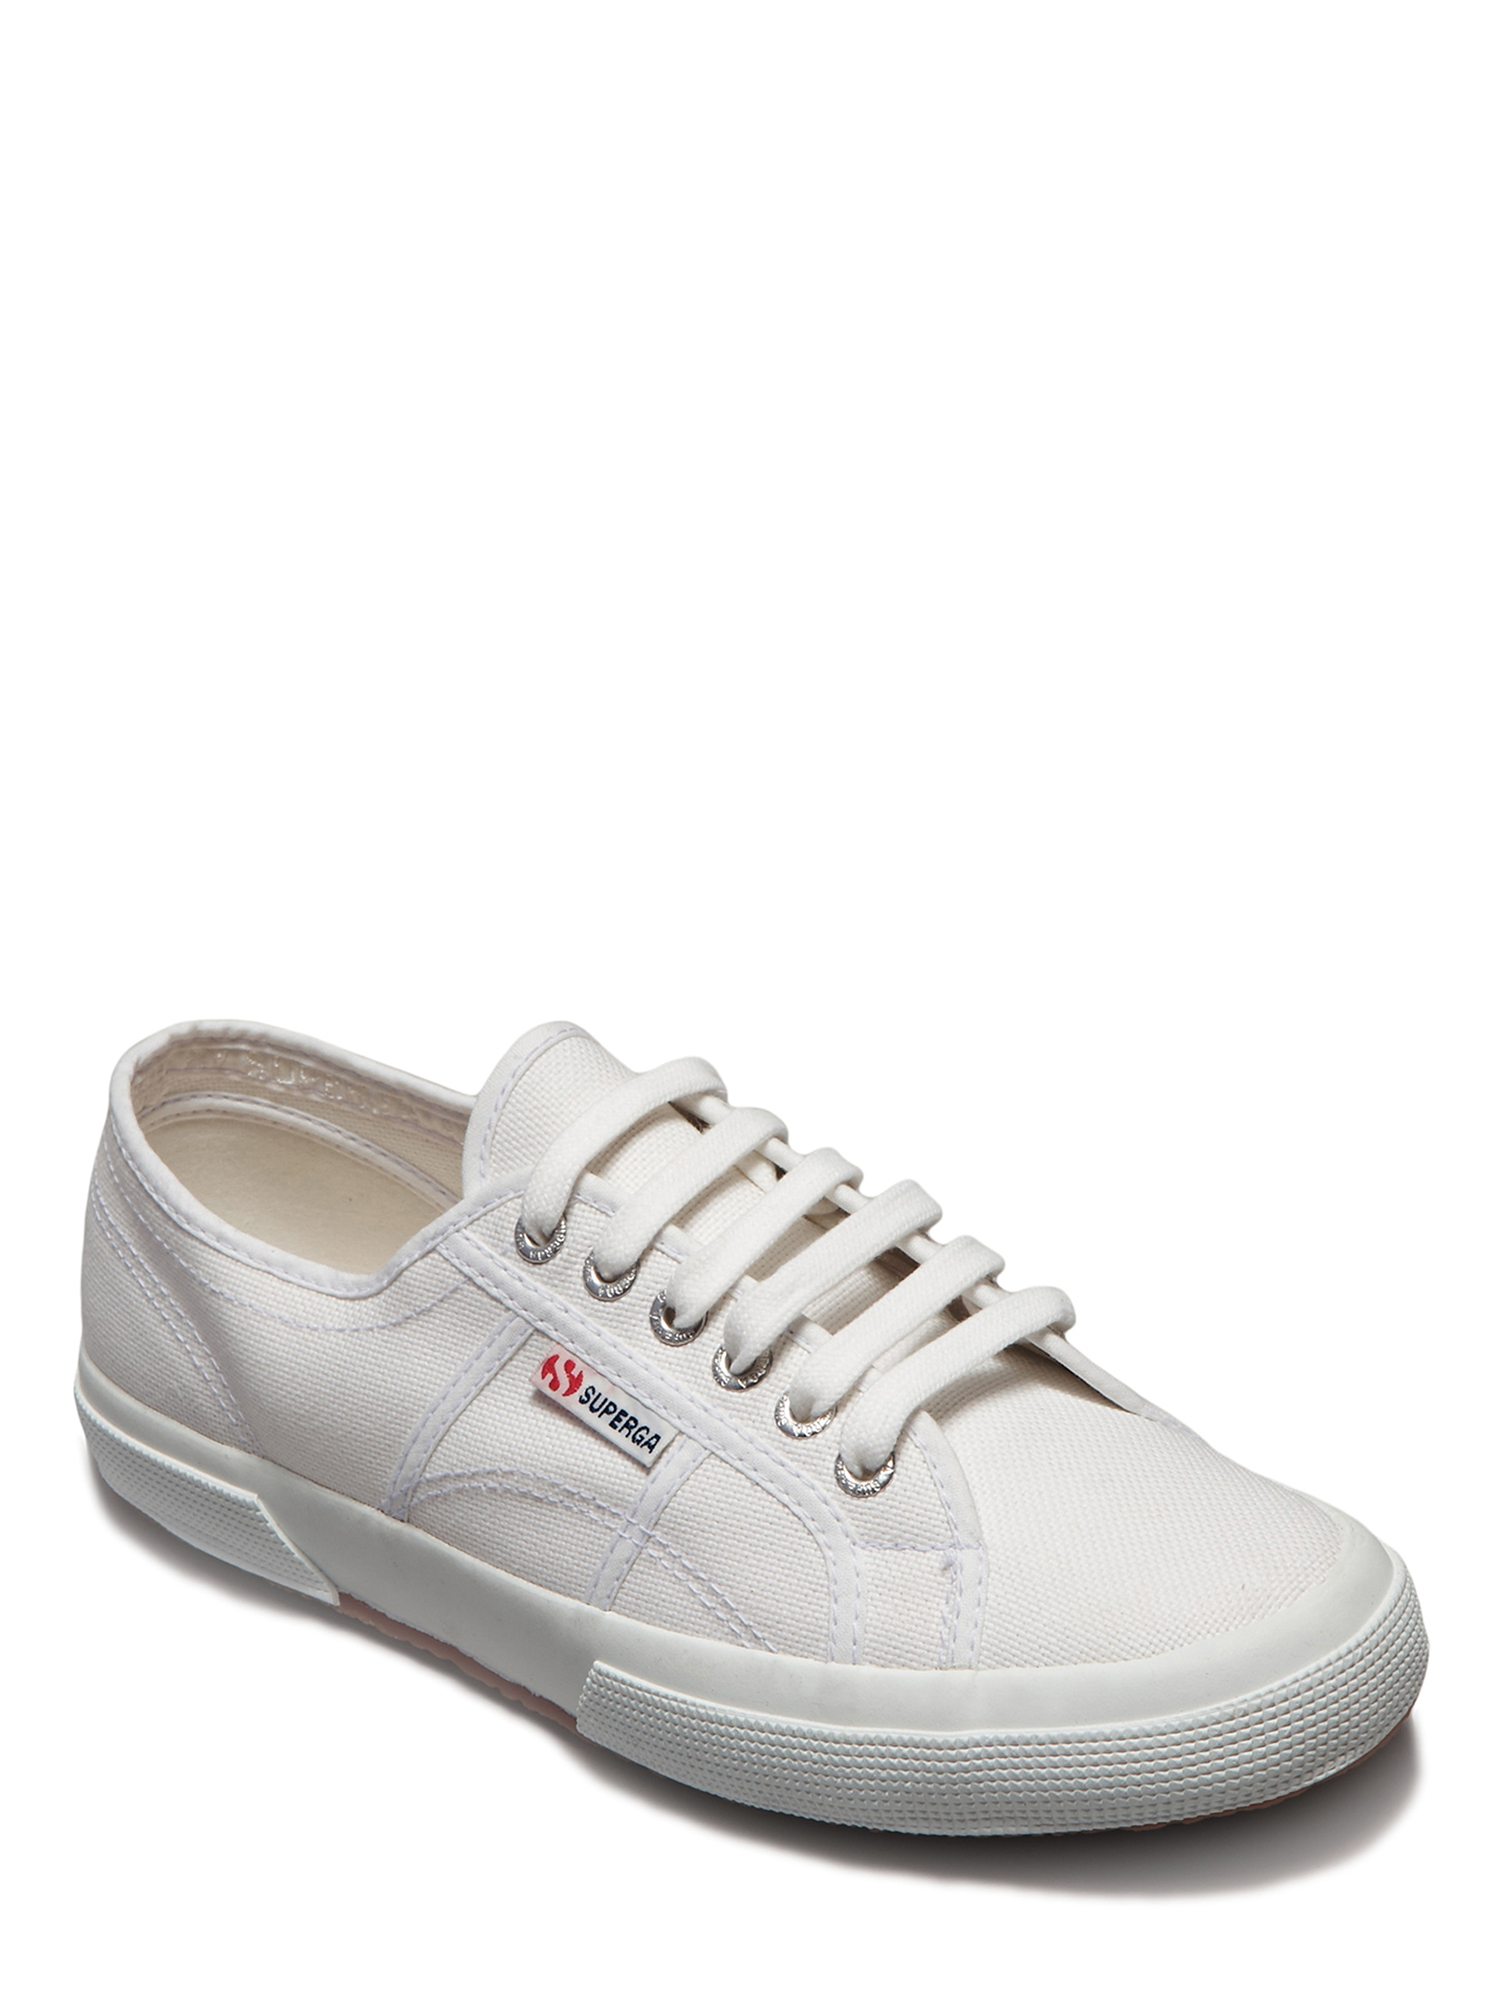 Superga 2750 Cotu Classic Lace-up Canvas Sneaker (Women's) - image 1 of 10